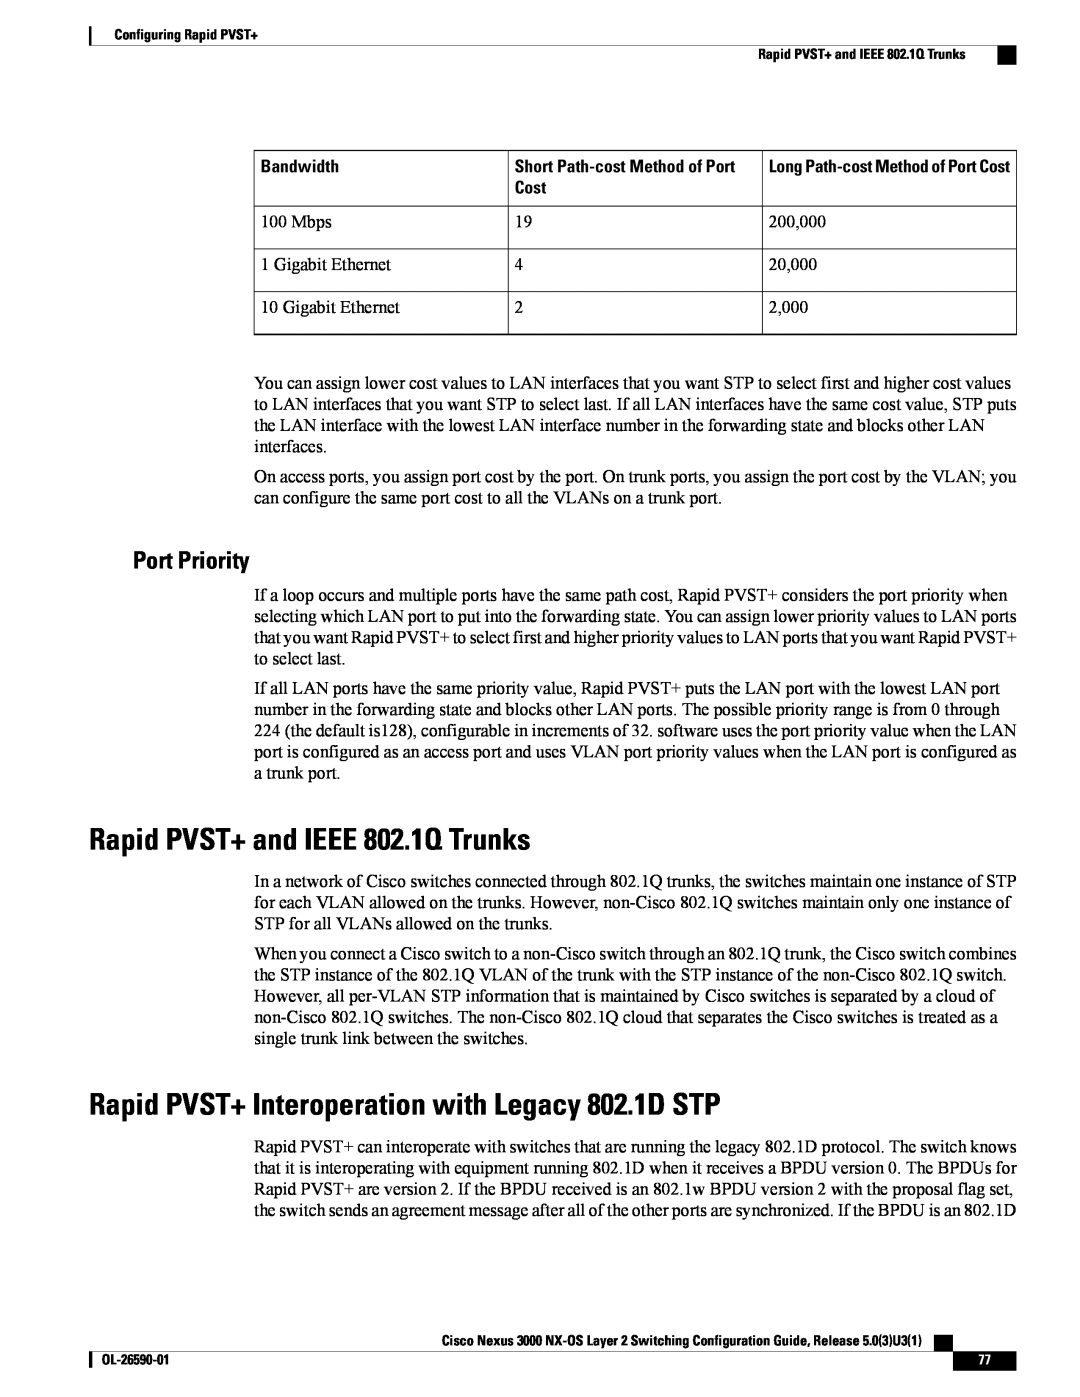 Cisco Systems N3KC3064TFAL3 Rapid PVST+ and IEEE 802.1Q Trunks, Rapid PVST+ Interoperation with Legacy 802.1D STP, Cost 